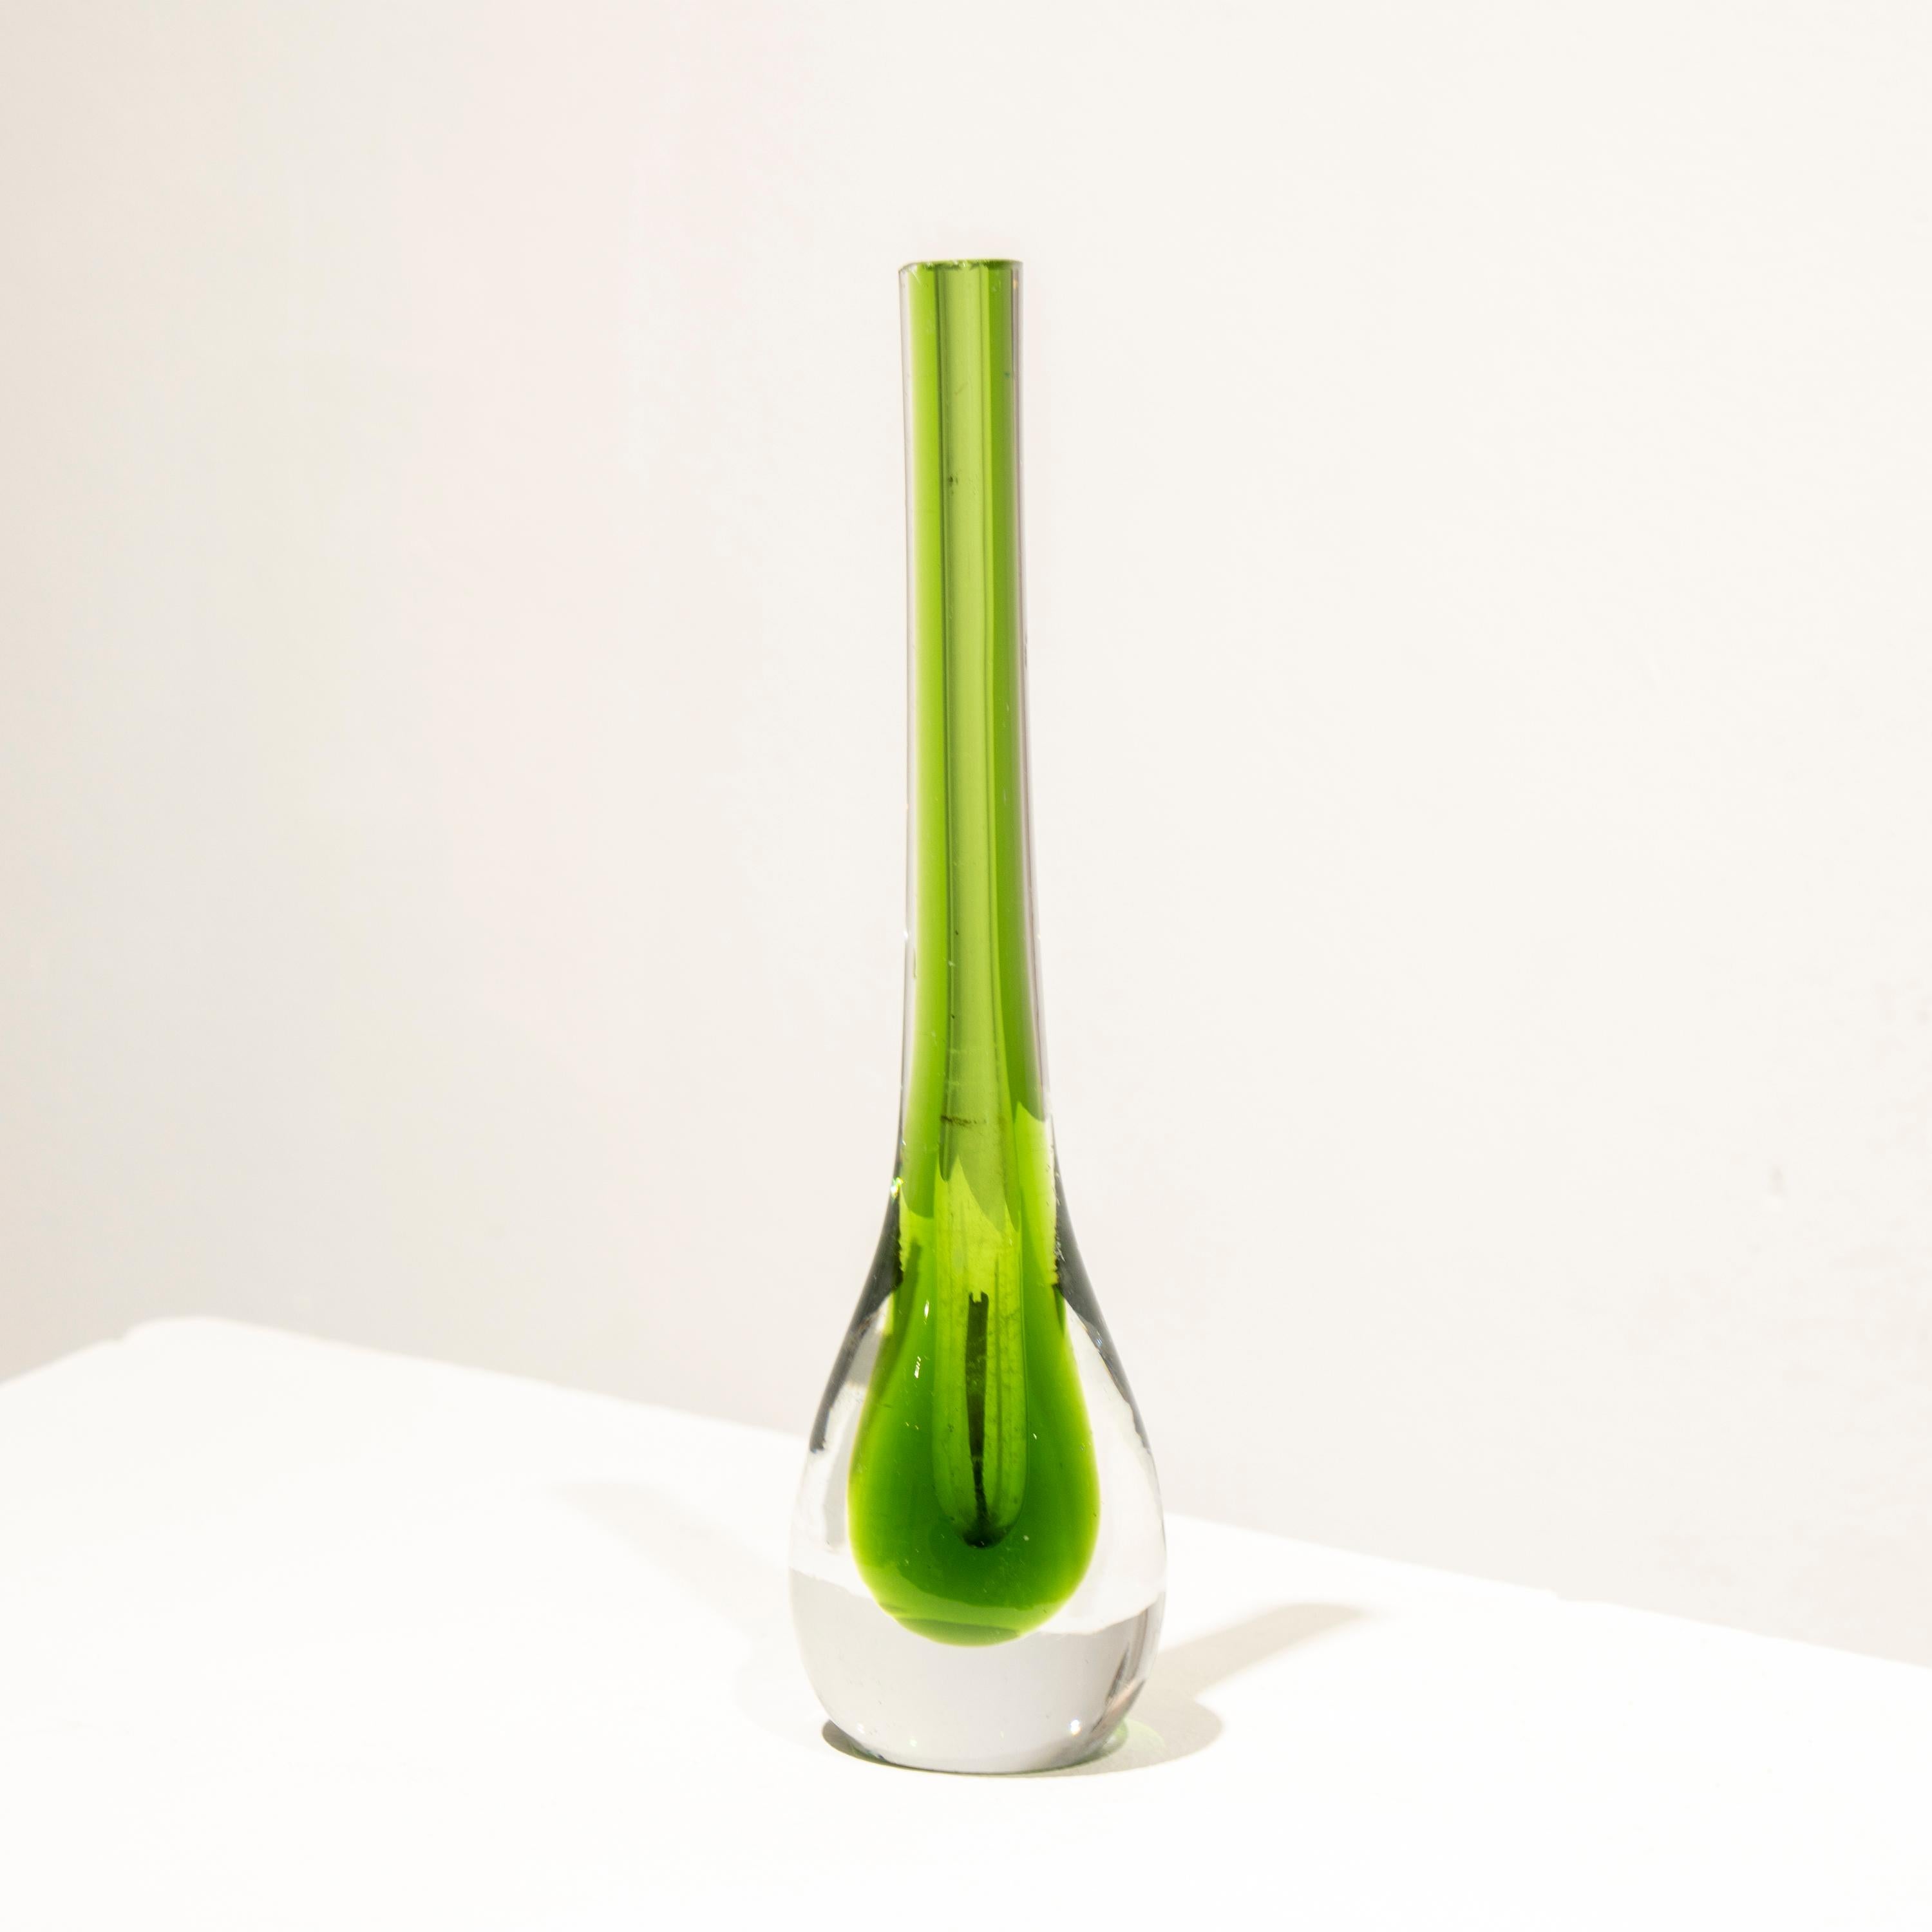 Italian small vase designed by Flavio Poli in the 1970's. The vase is hand-crafted in Murano glass with a tear-shape in green. 